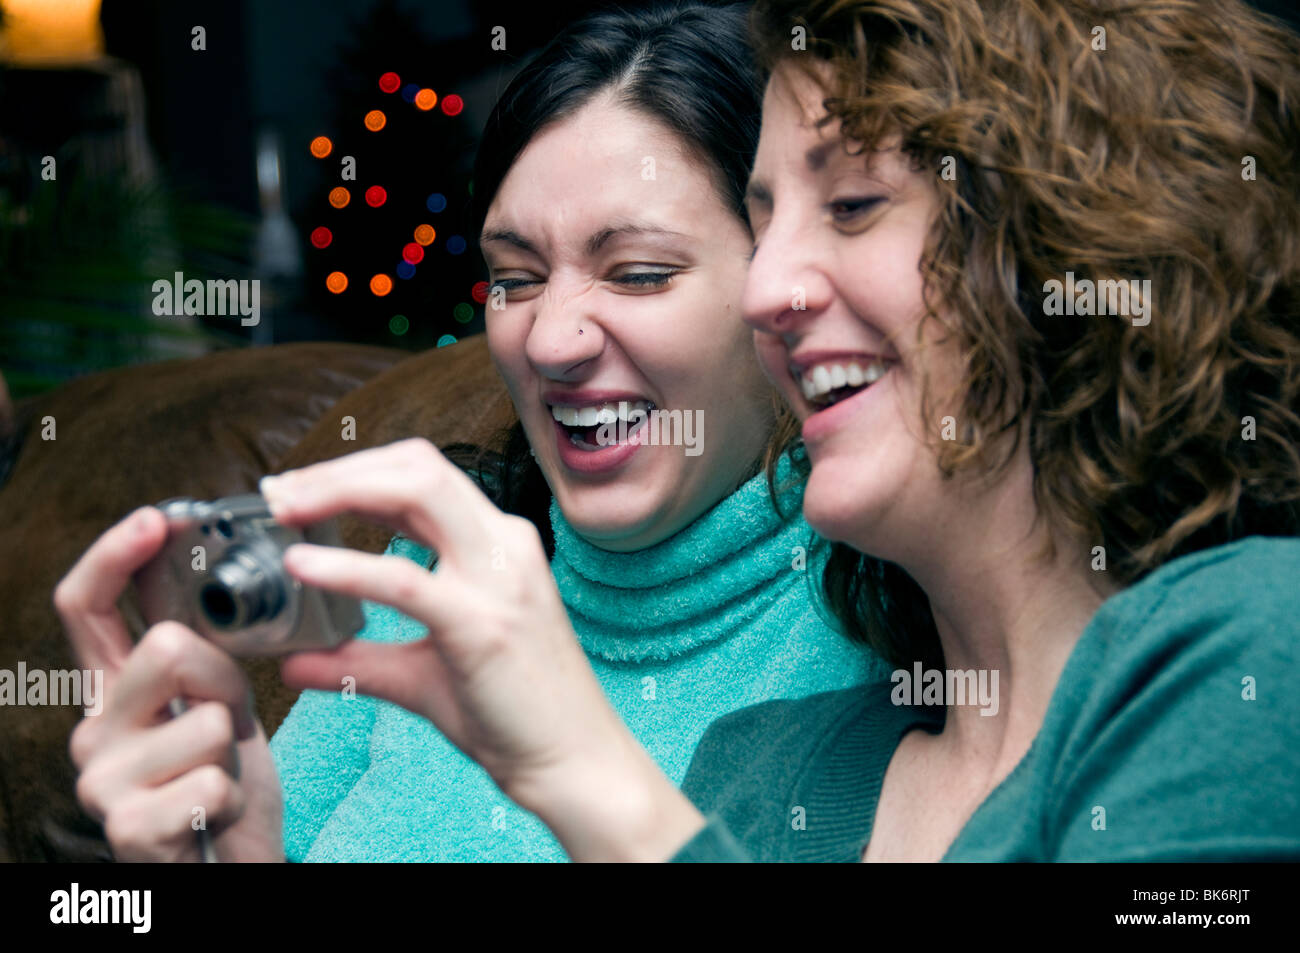 Two women review pictures on a digital camera and laugh. Stock Photo